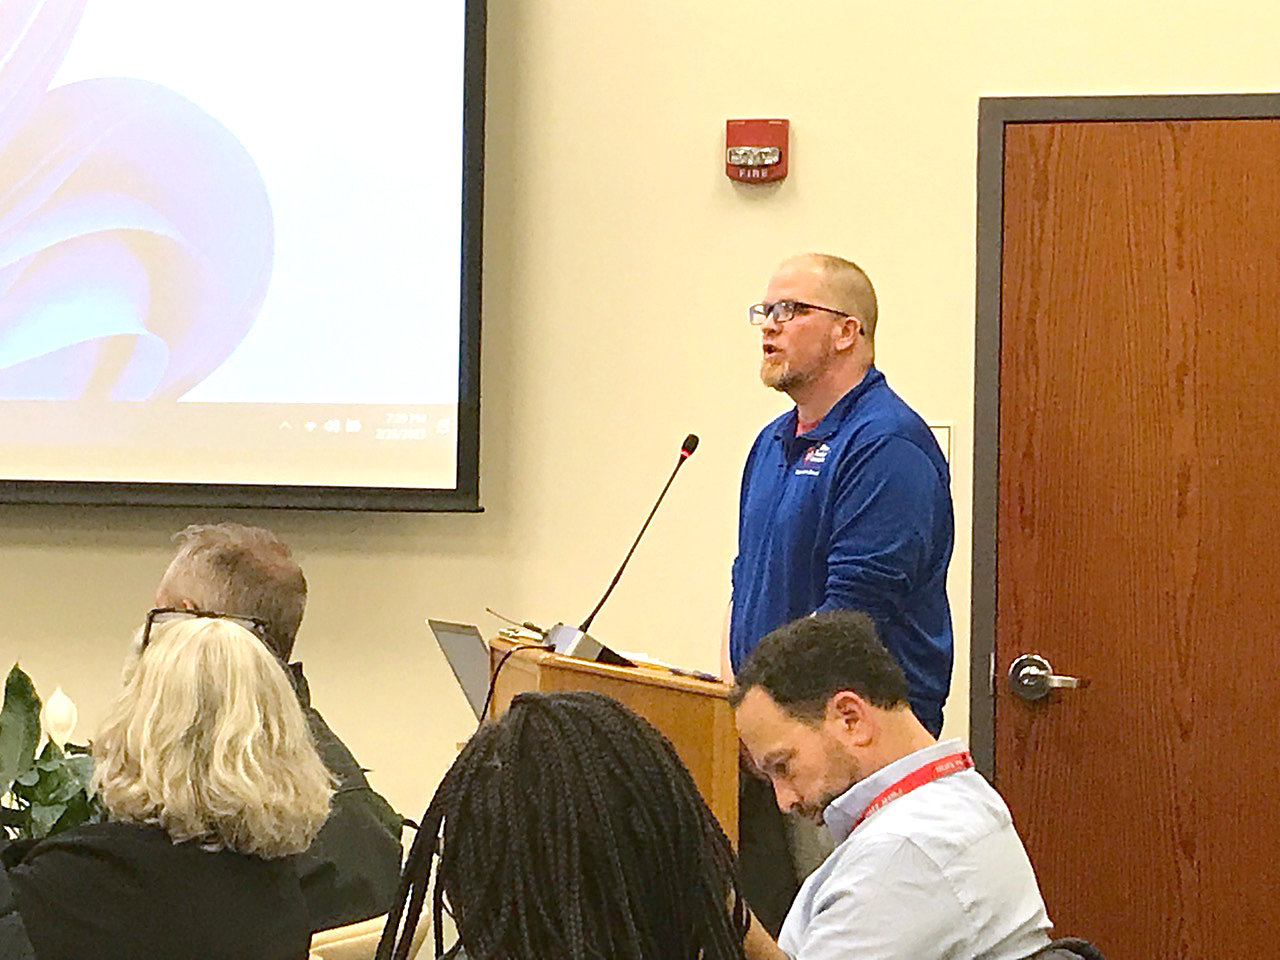 Utica Teachers’ Association President Scott Rogowski tells the Utica City School District Board of Education and their audience Tuesday that the union recently voted to approve a contract with the district with 96% of members in favor of the agreement.